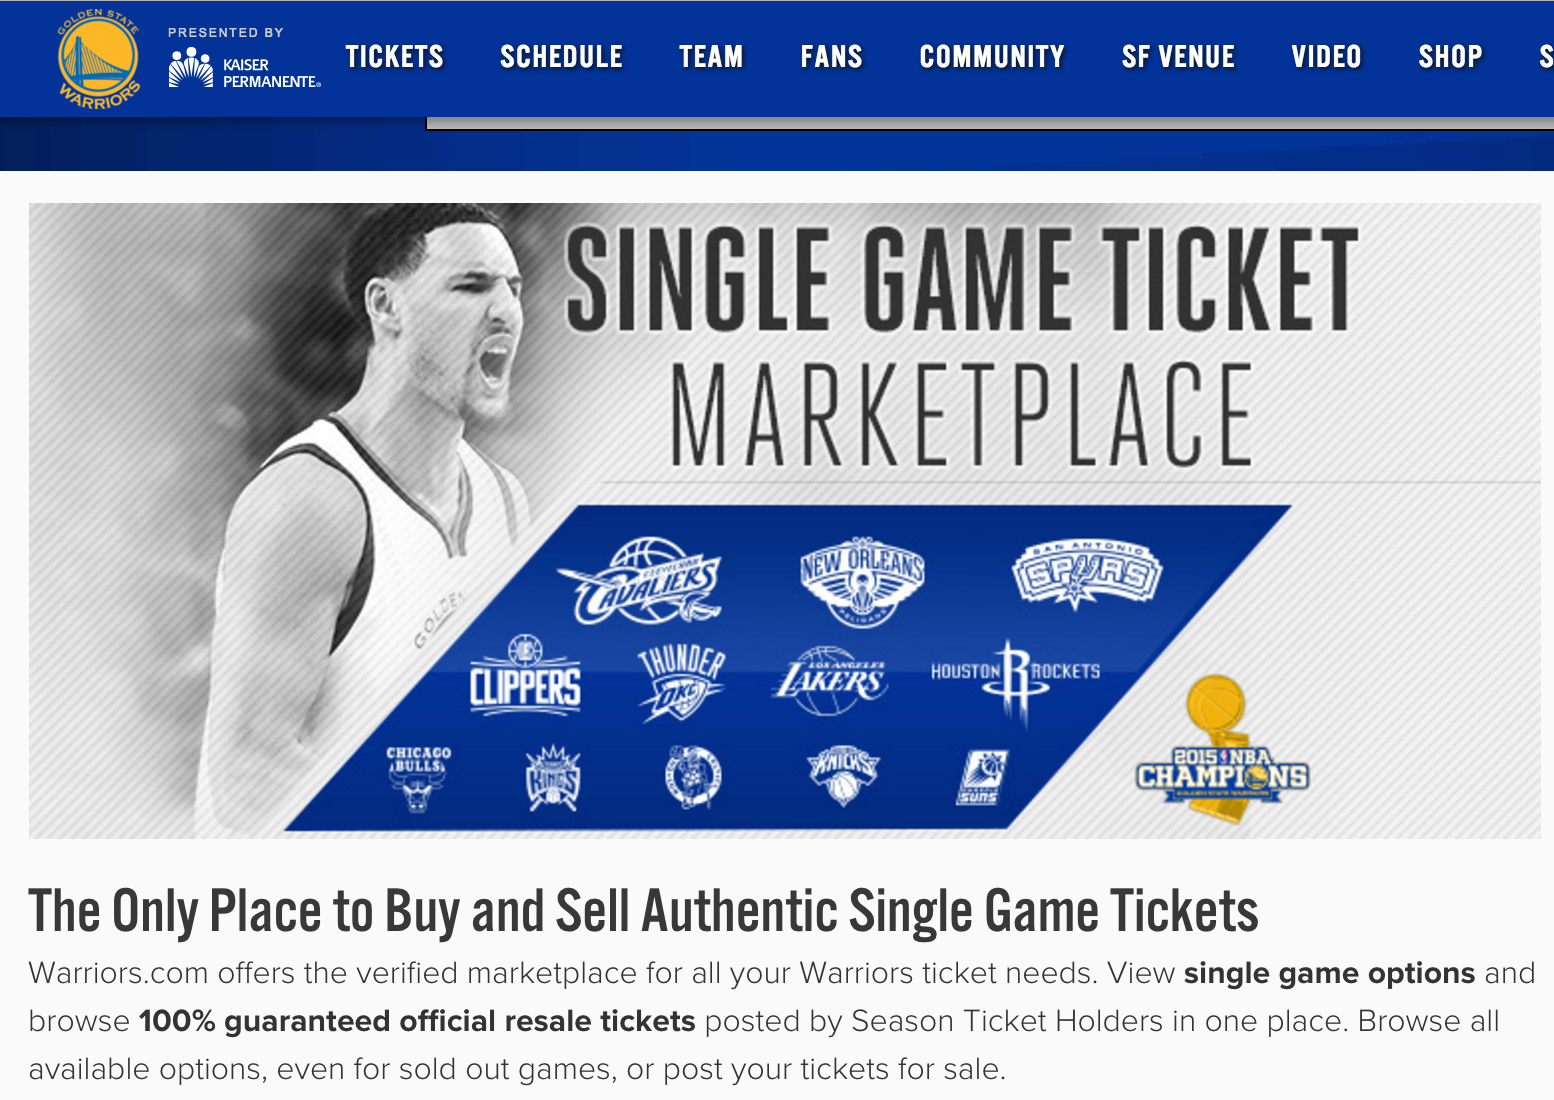 Court Throws Out StubHub’s Lawsuit Against Ticketmaster, Golden State Warriors